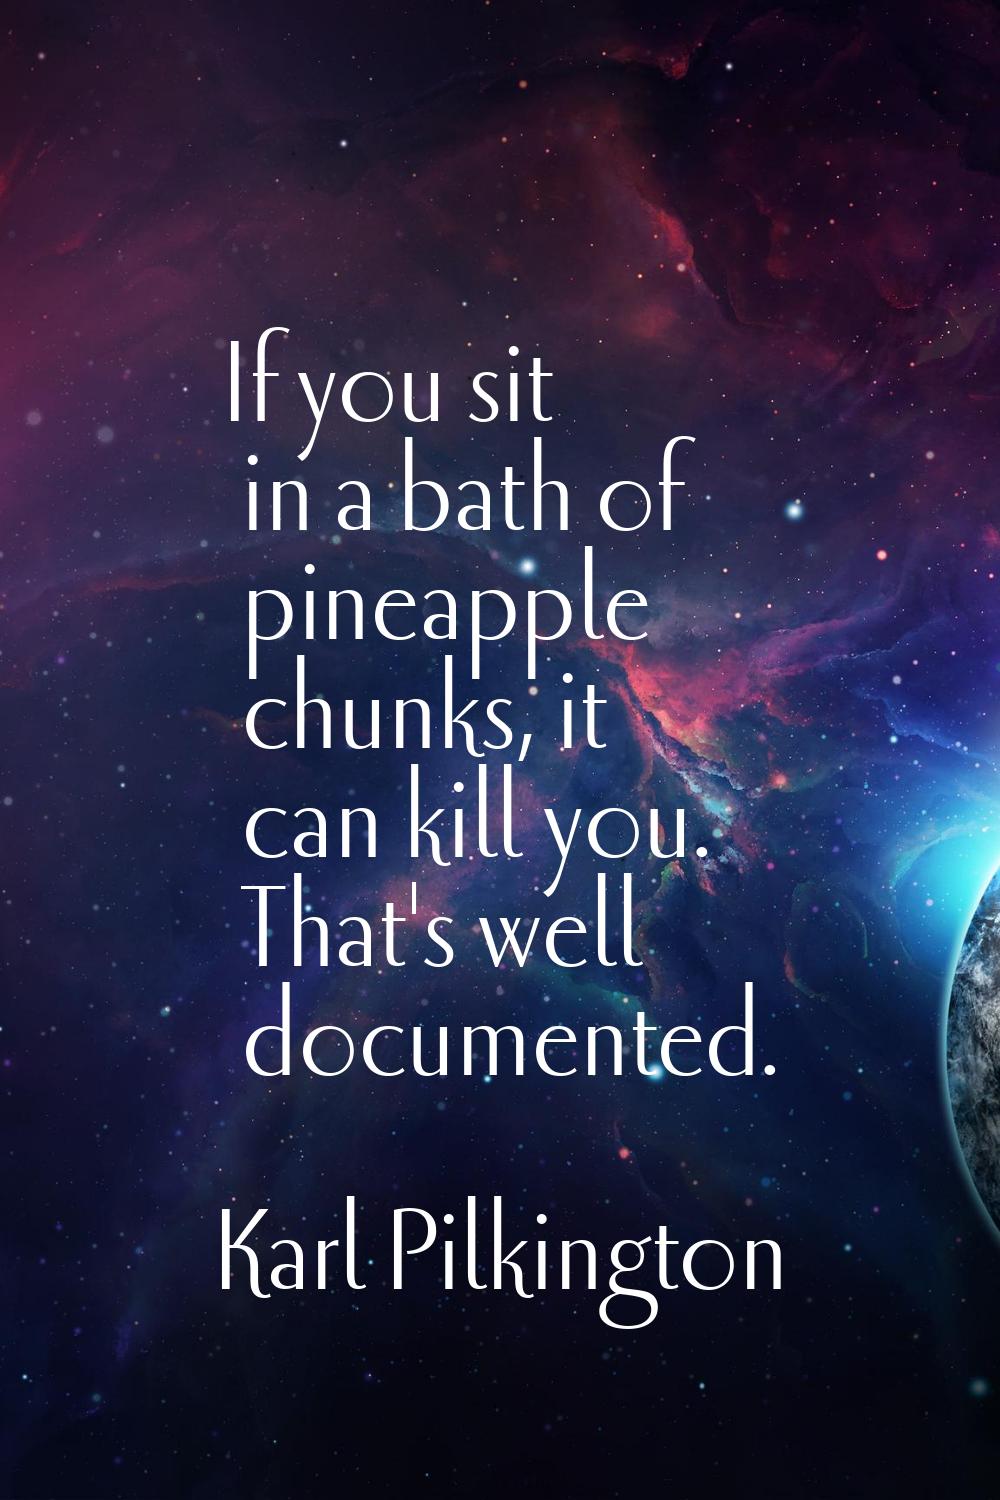 If you sit in a bath of pineapple chunks, it can kill you. That's well documented.